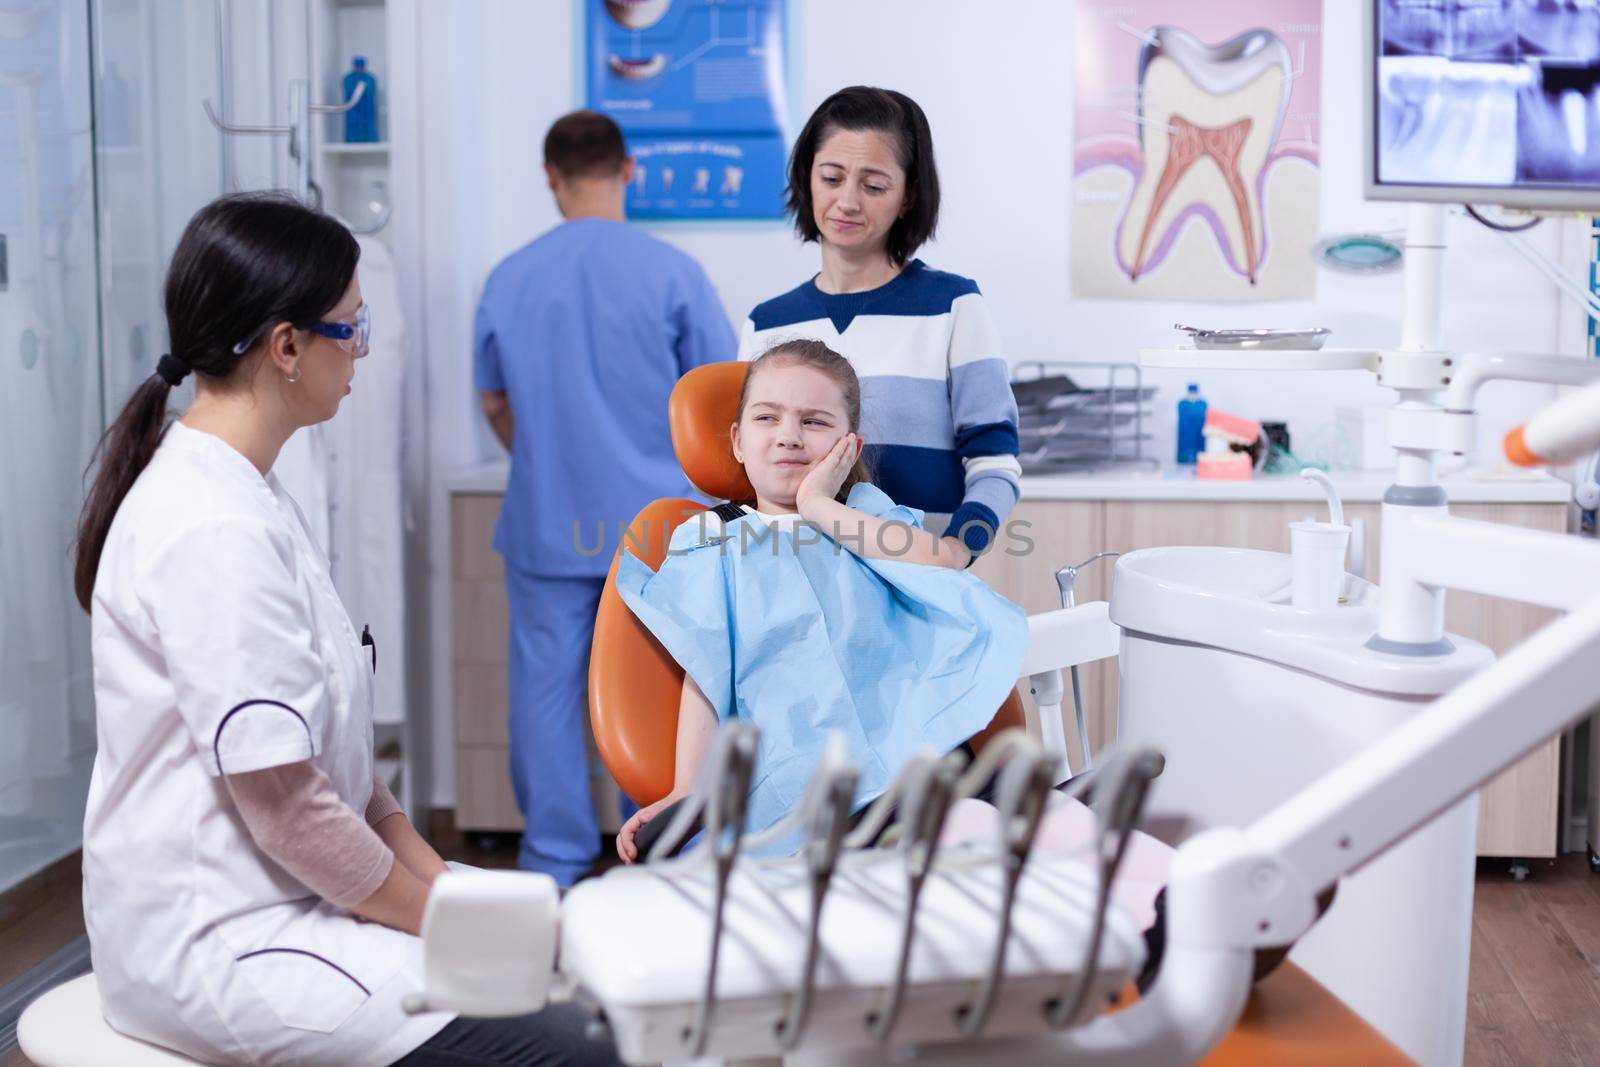 Little girl with painful expression showing dentist where her tooth hurts by DCStudio